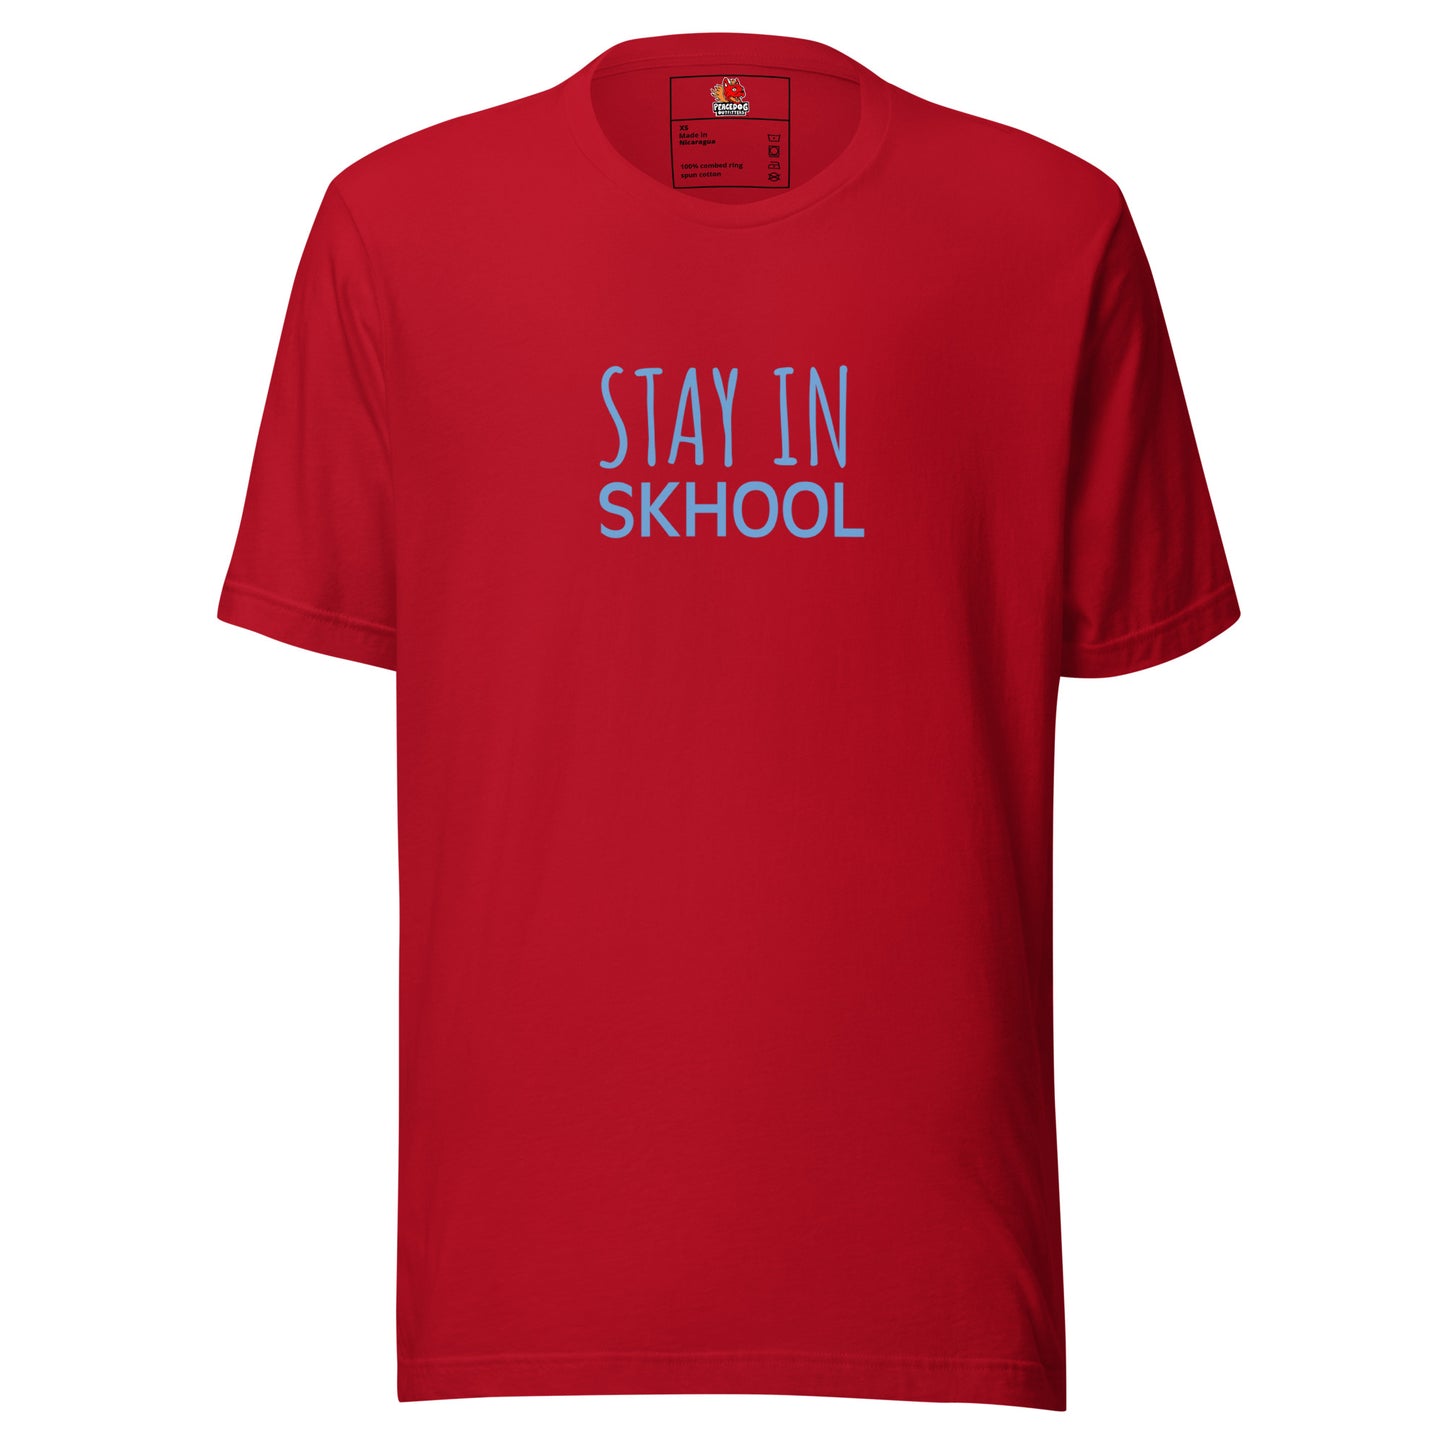 Stay in Skhool T-shirt